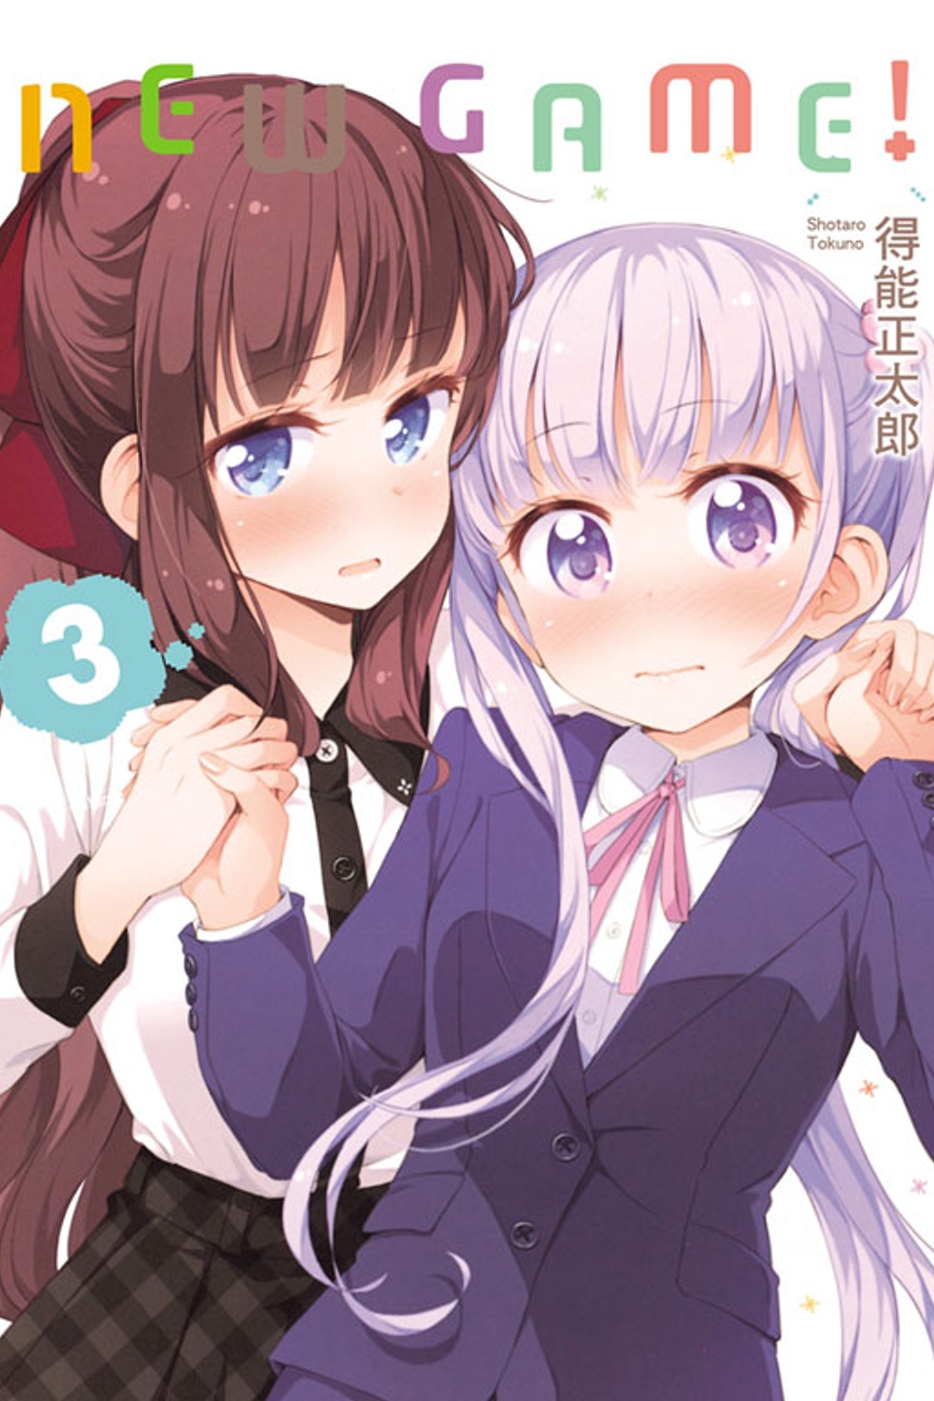 NEW GAME！ 3